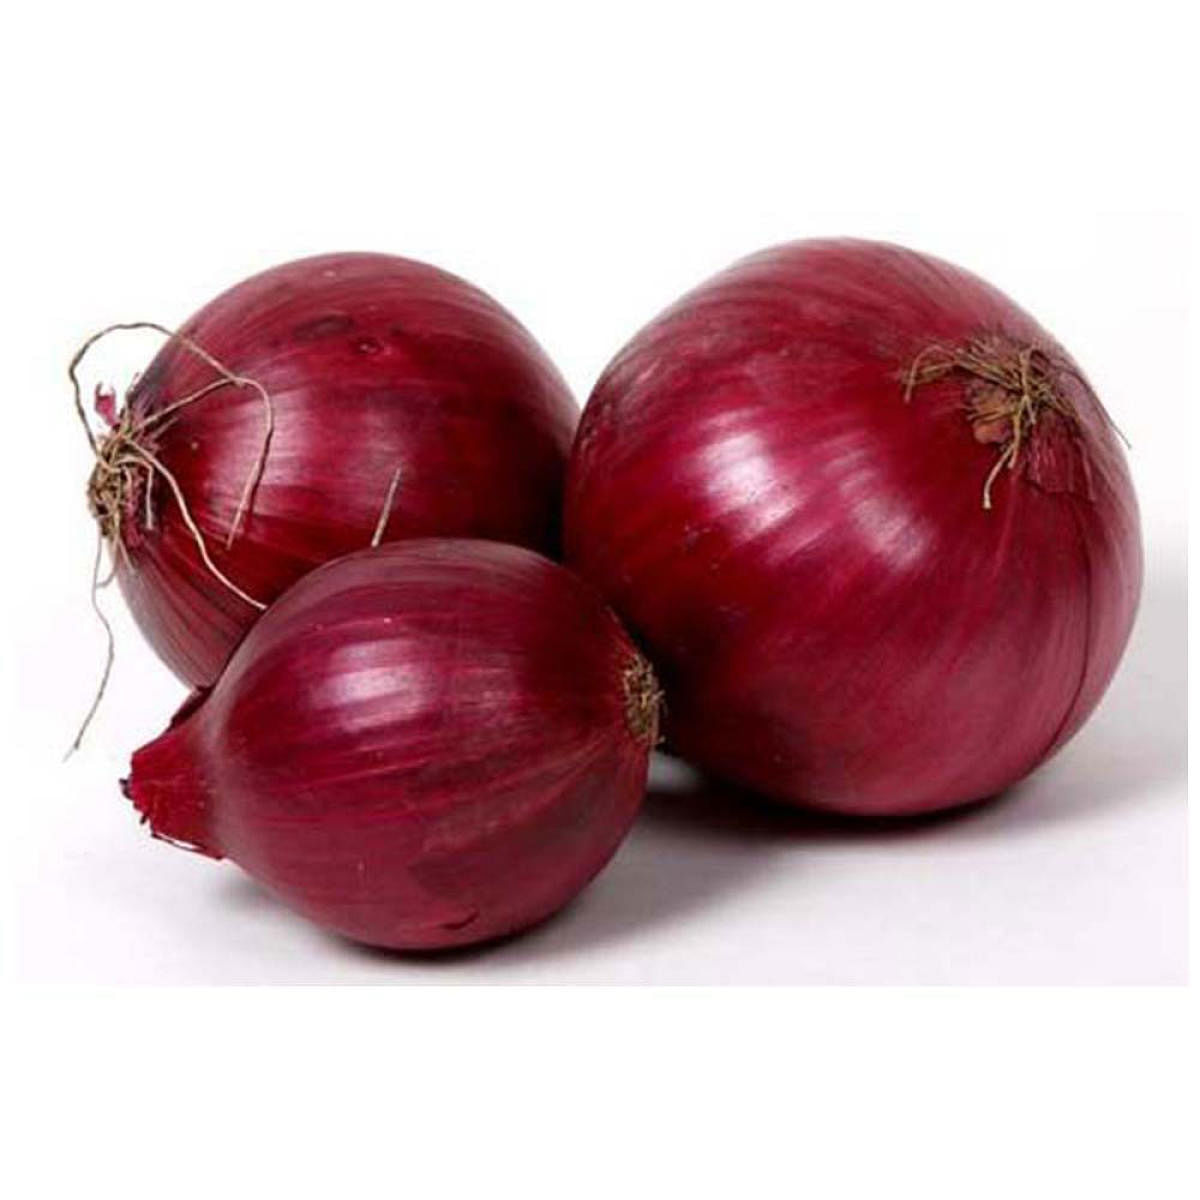 Onion prices bring politicians to tears in Maharashtra